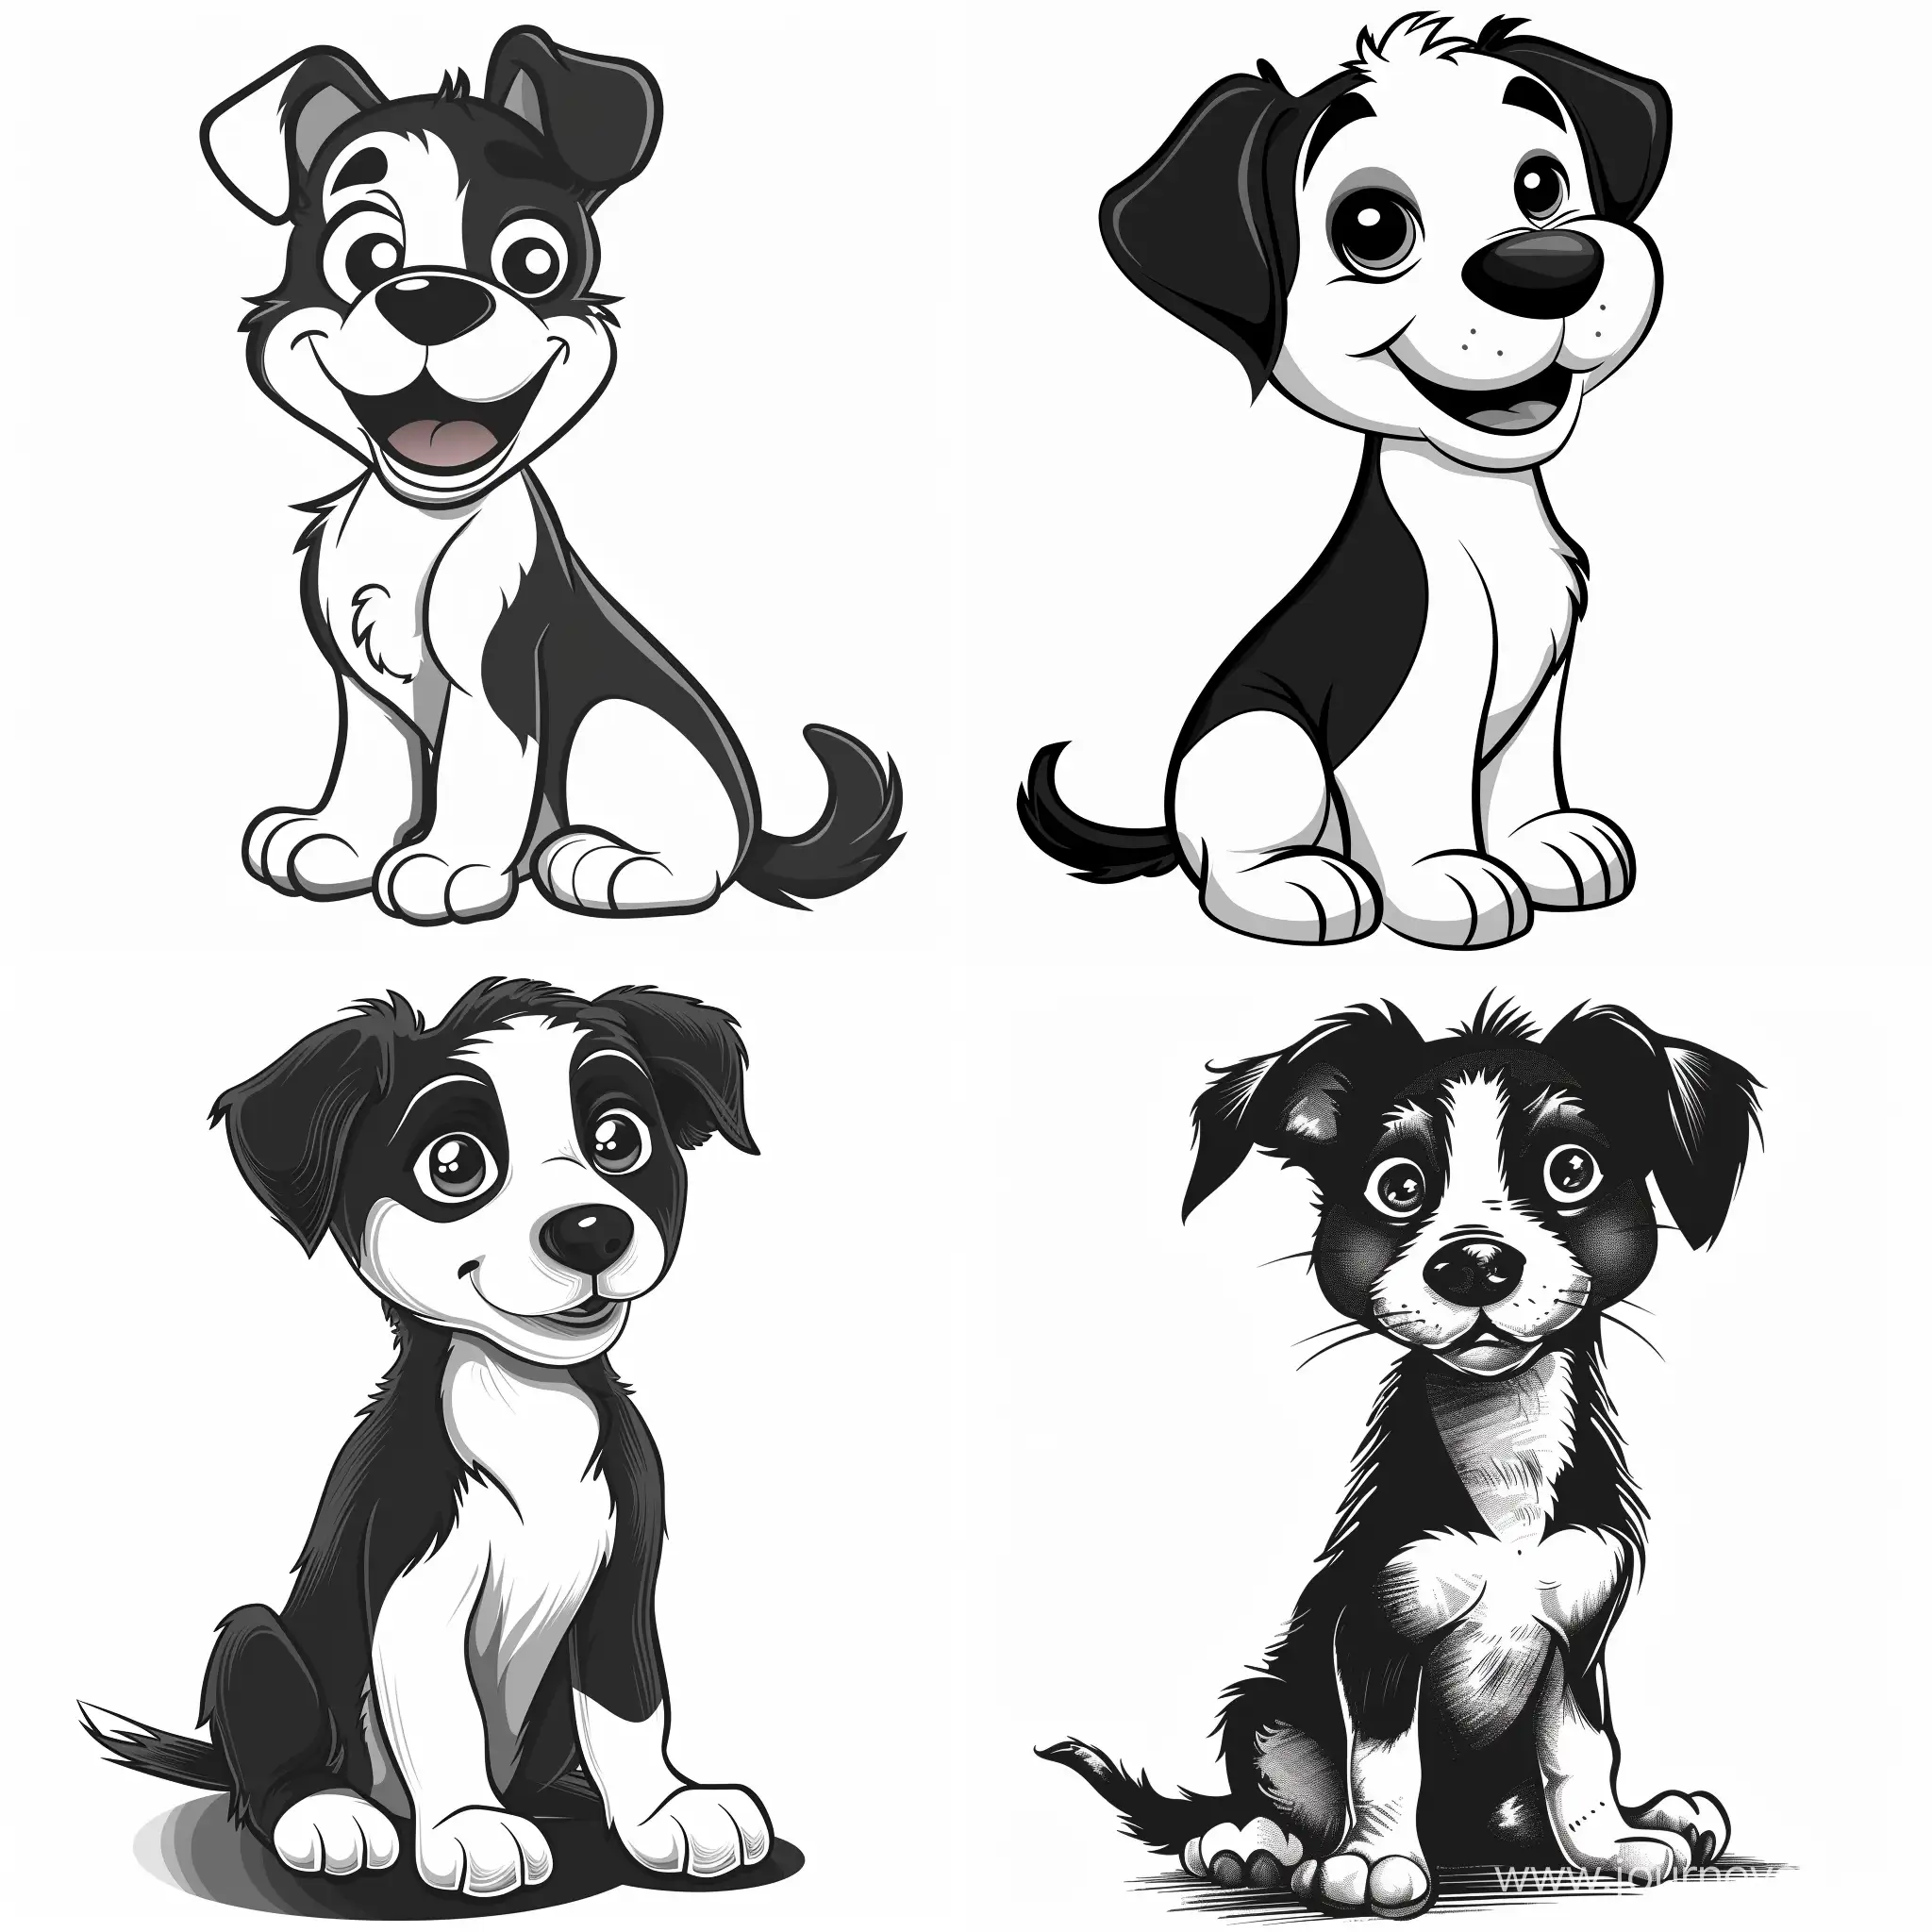 Playful-Cartoon-Dog-in-Black-and-White-Sketch